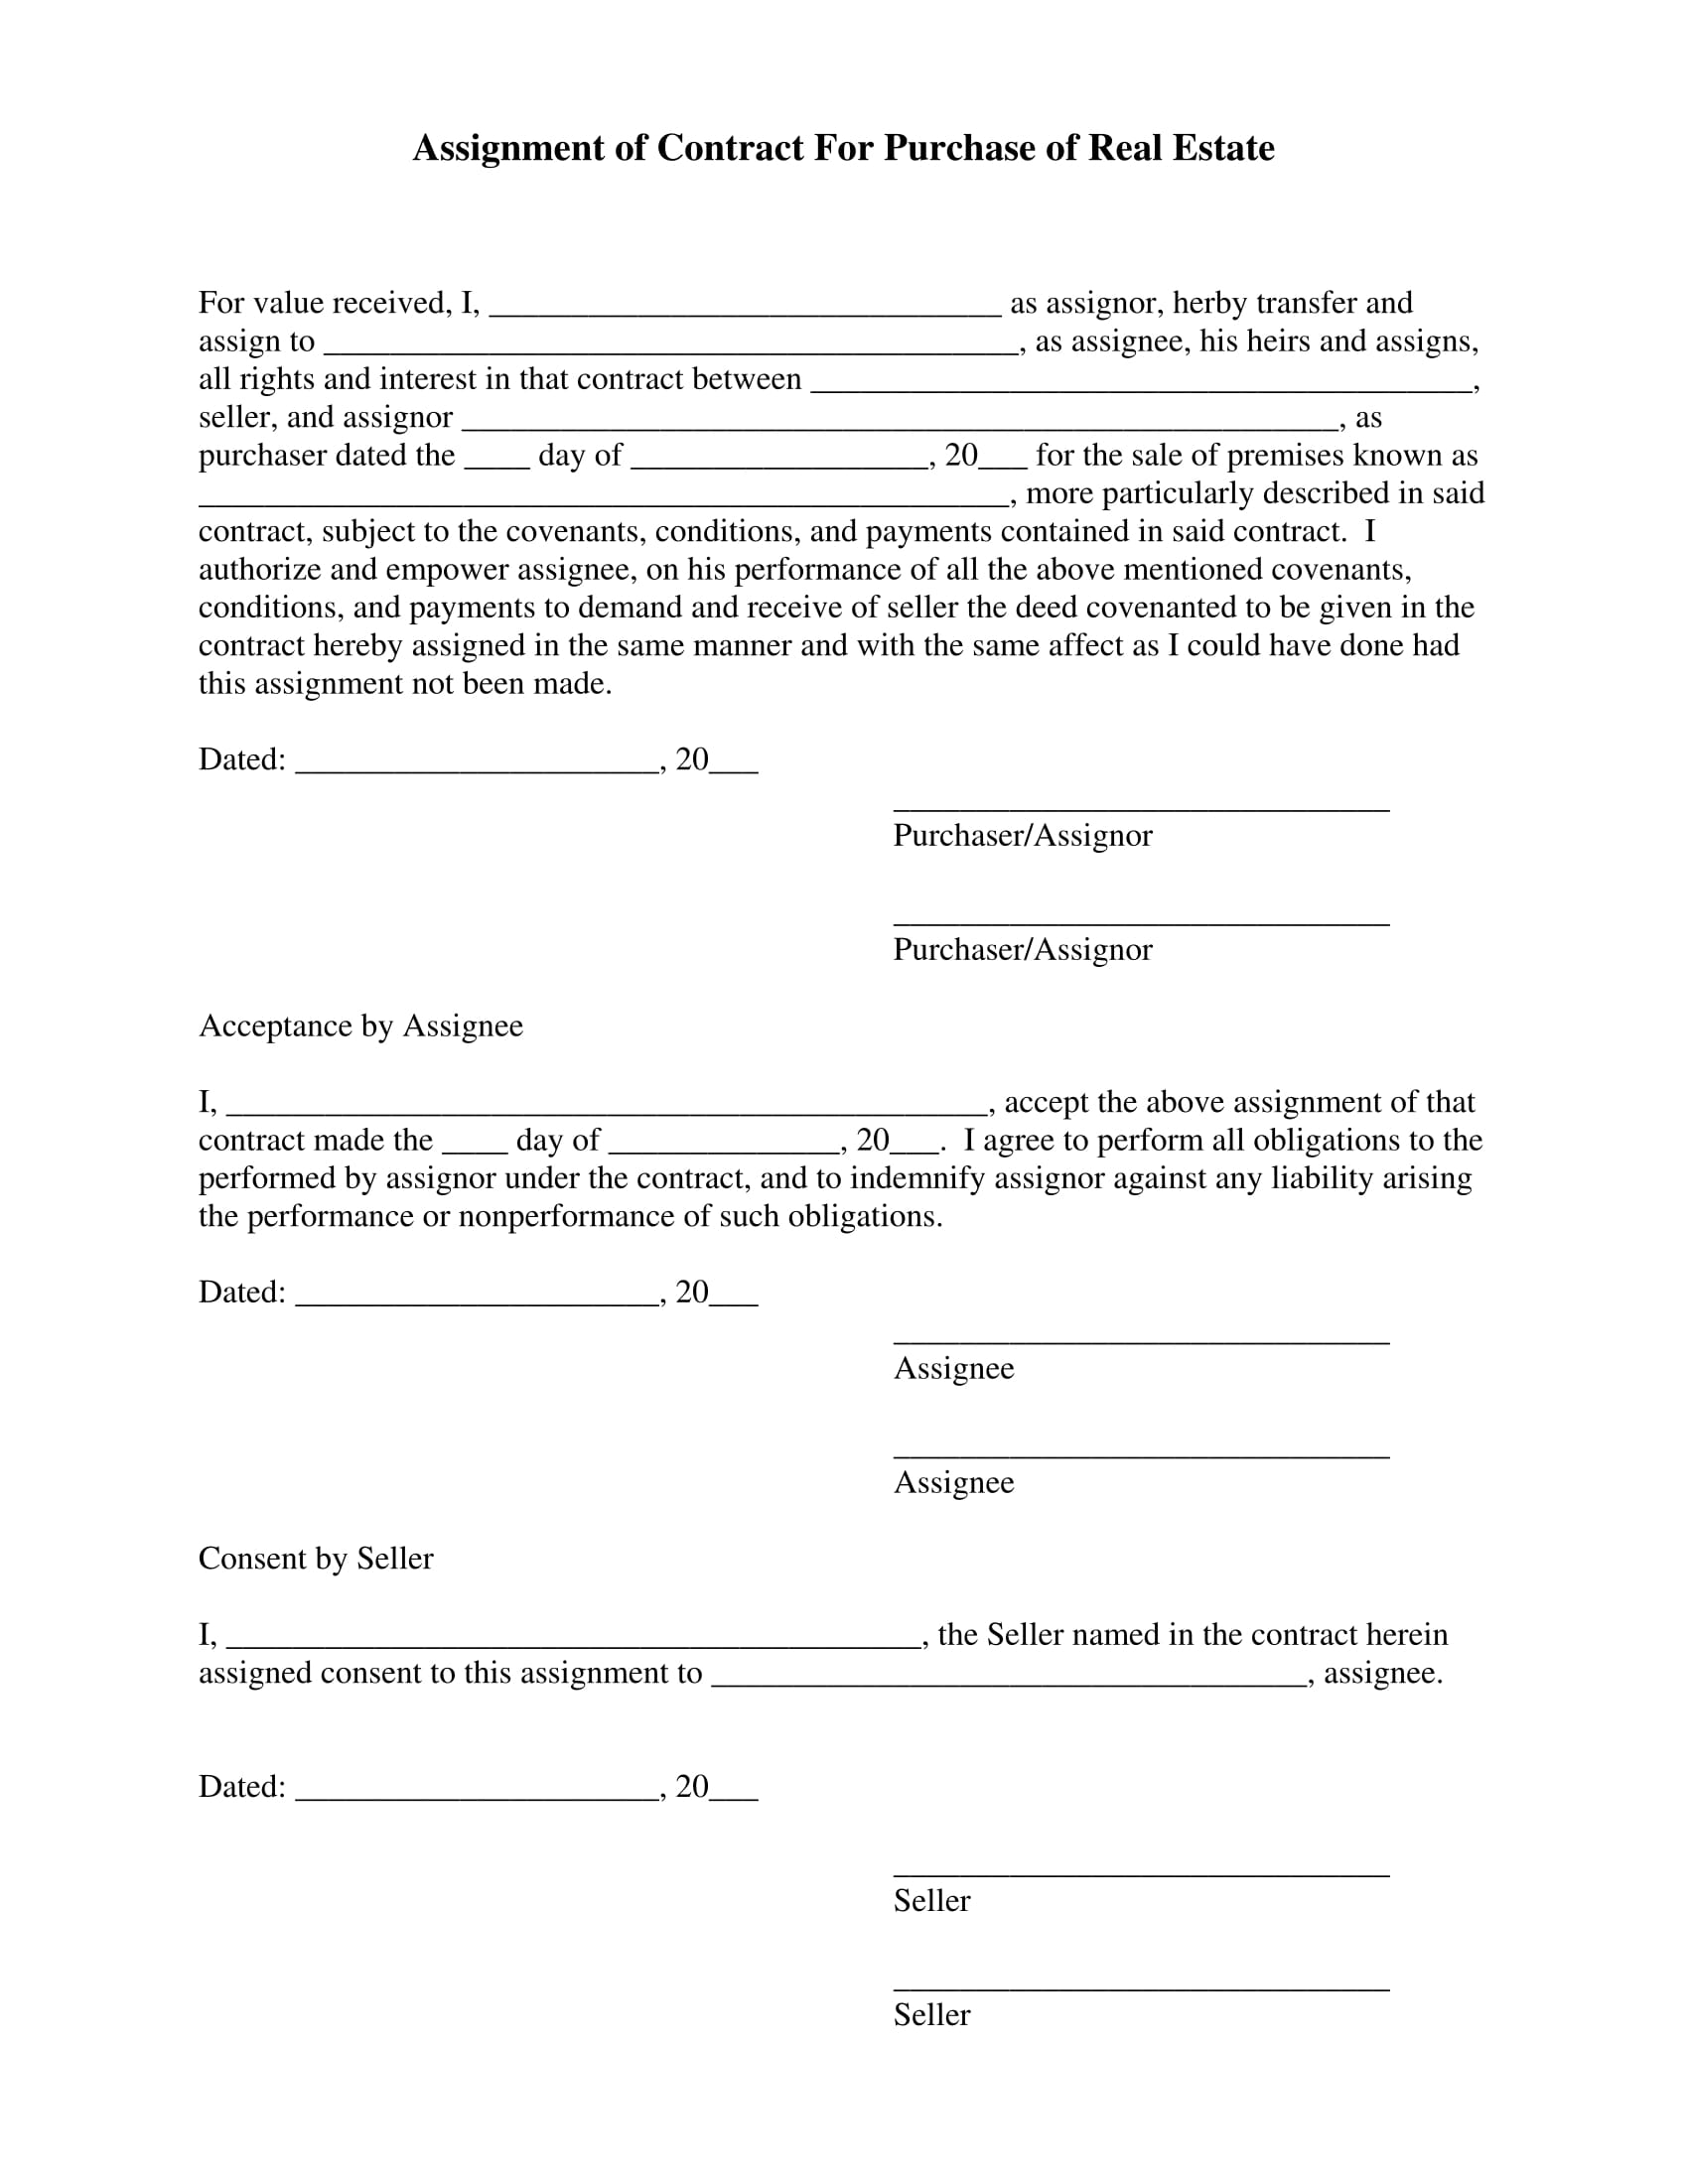 real estate assignment contract form 1